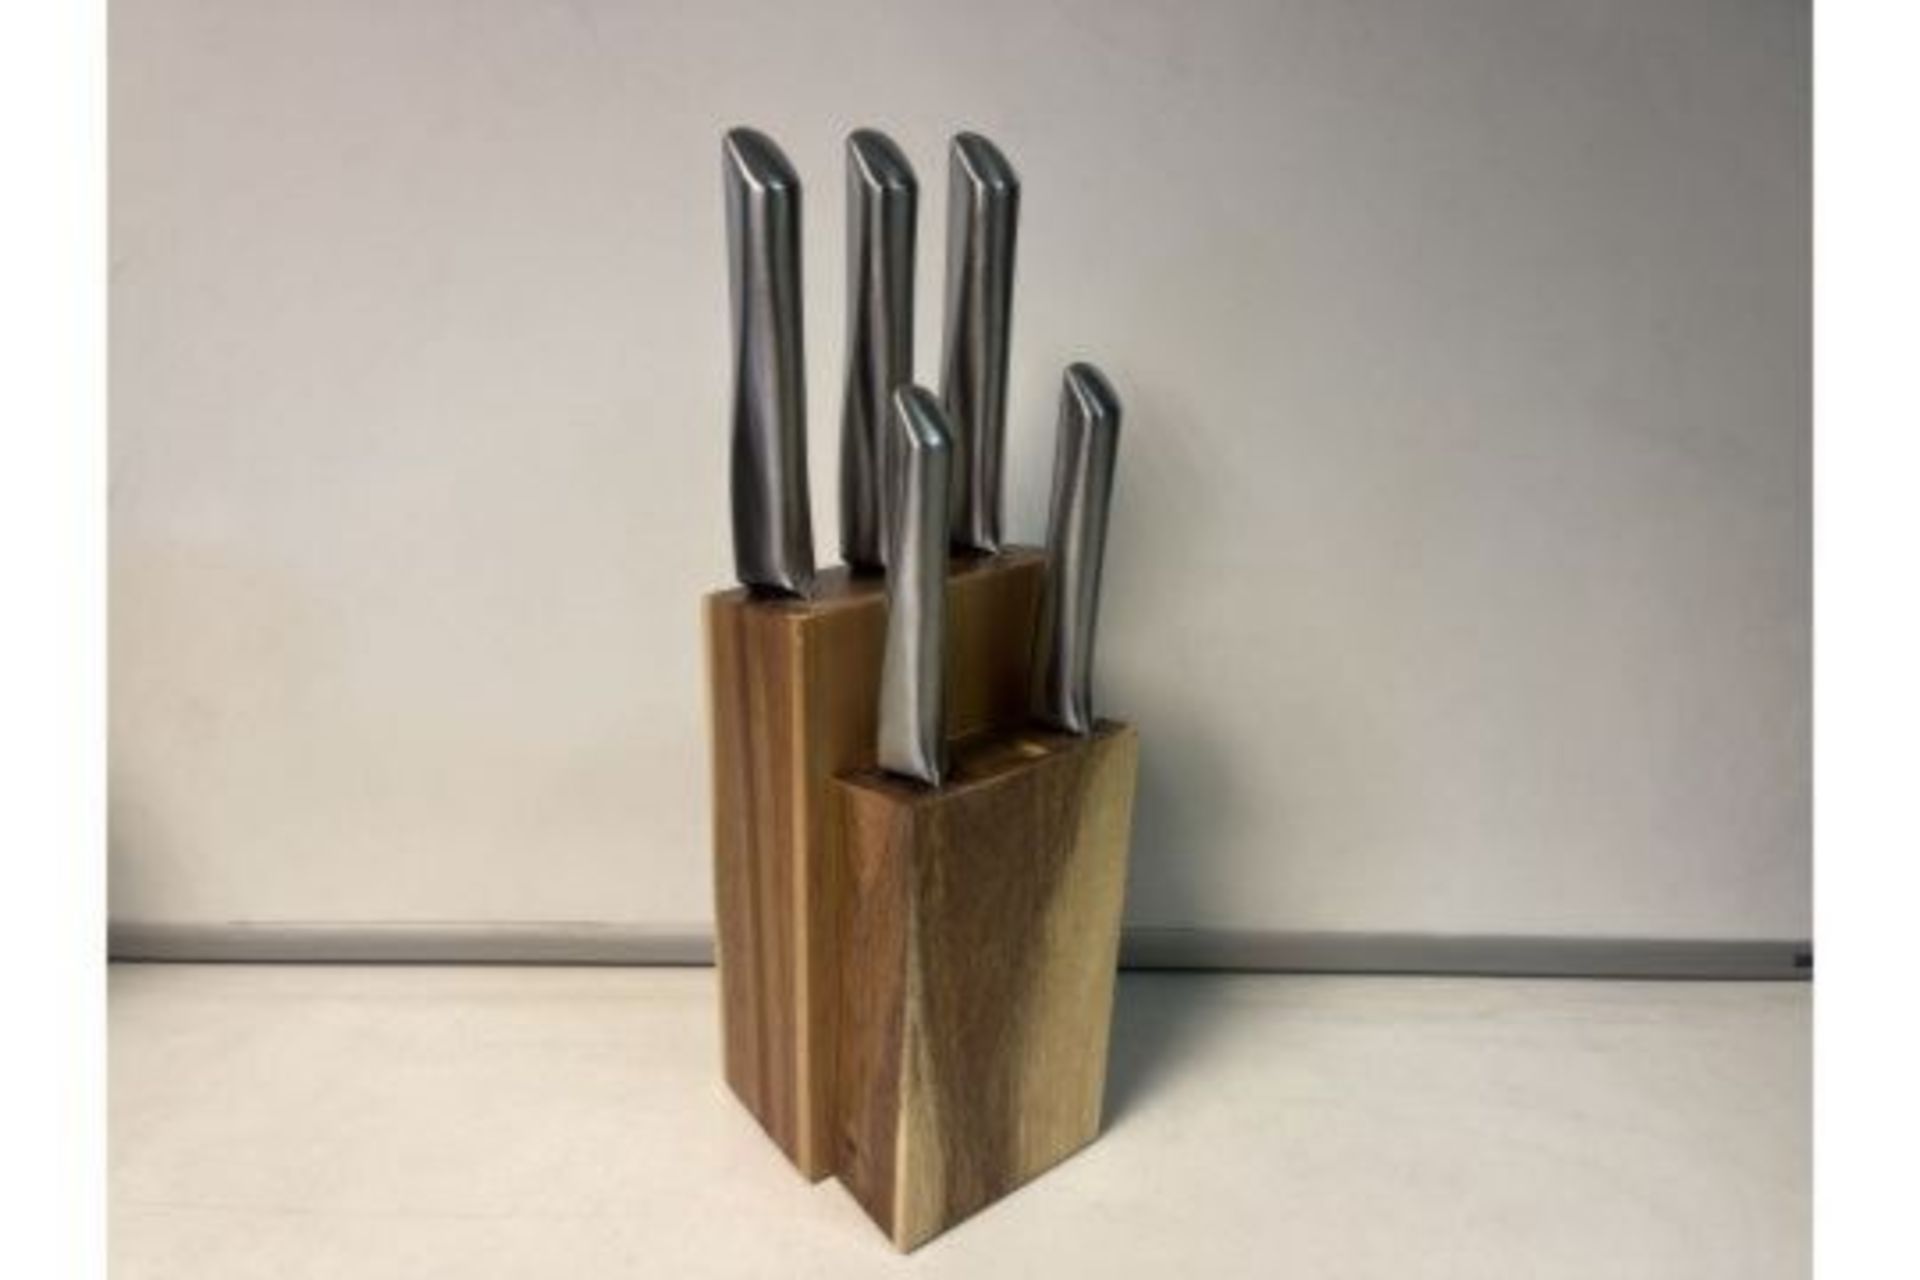 2 X BRAND NEW LUXURY 5 PIECE STAINLESS STEEL ACACIA WOOD KNIFE BLOCK SETS R13.5RACK